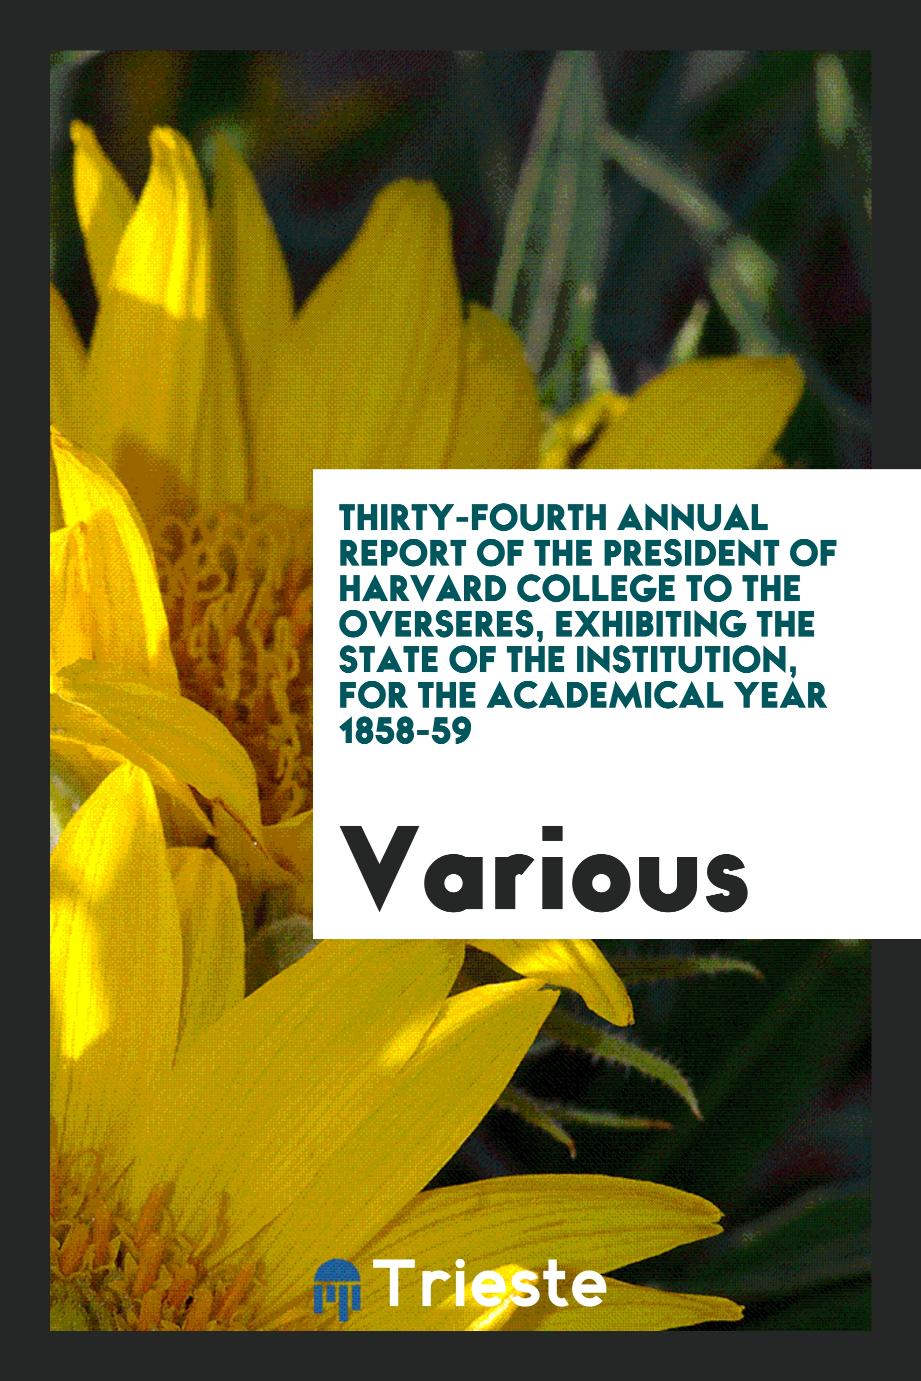 Thirty-fourth annual Report of the President of Harvard College to the overseres, exhibiting the state of the institution, for the academical year 1858-59